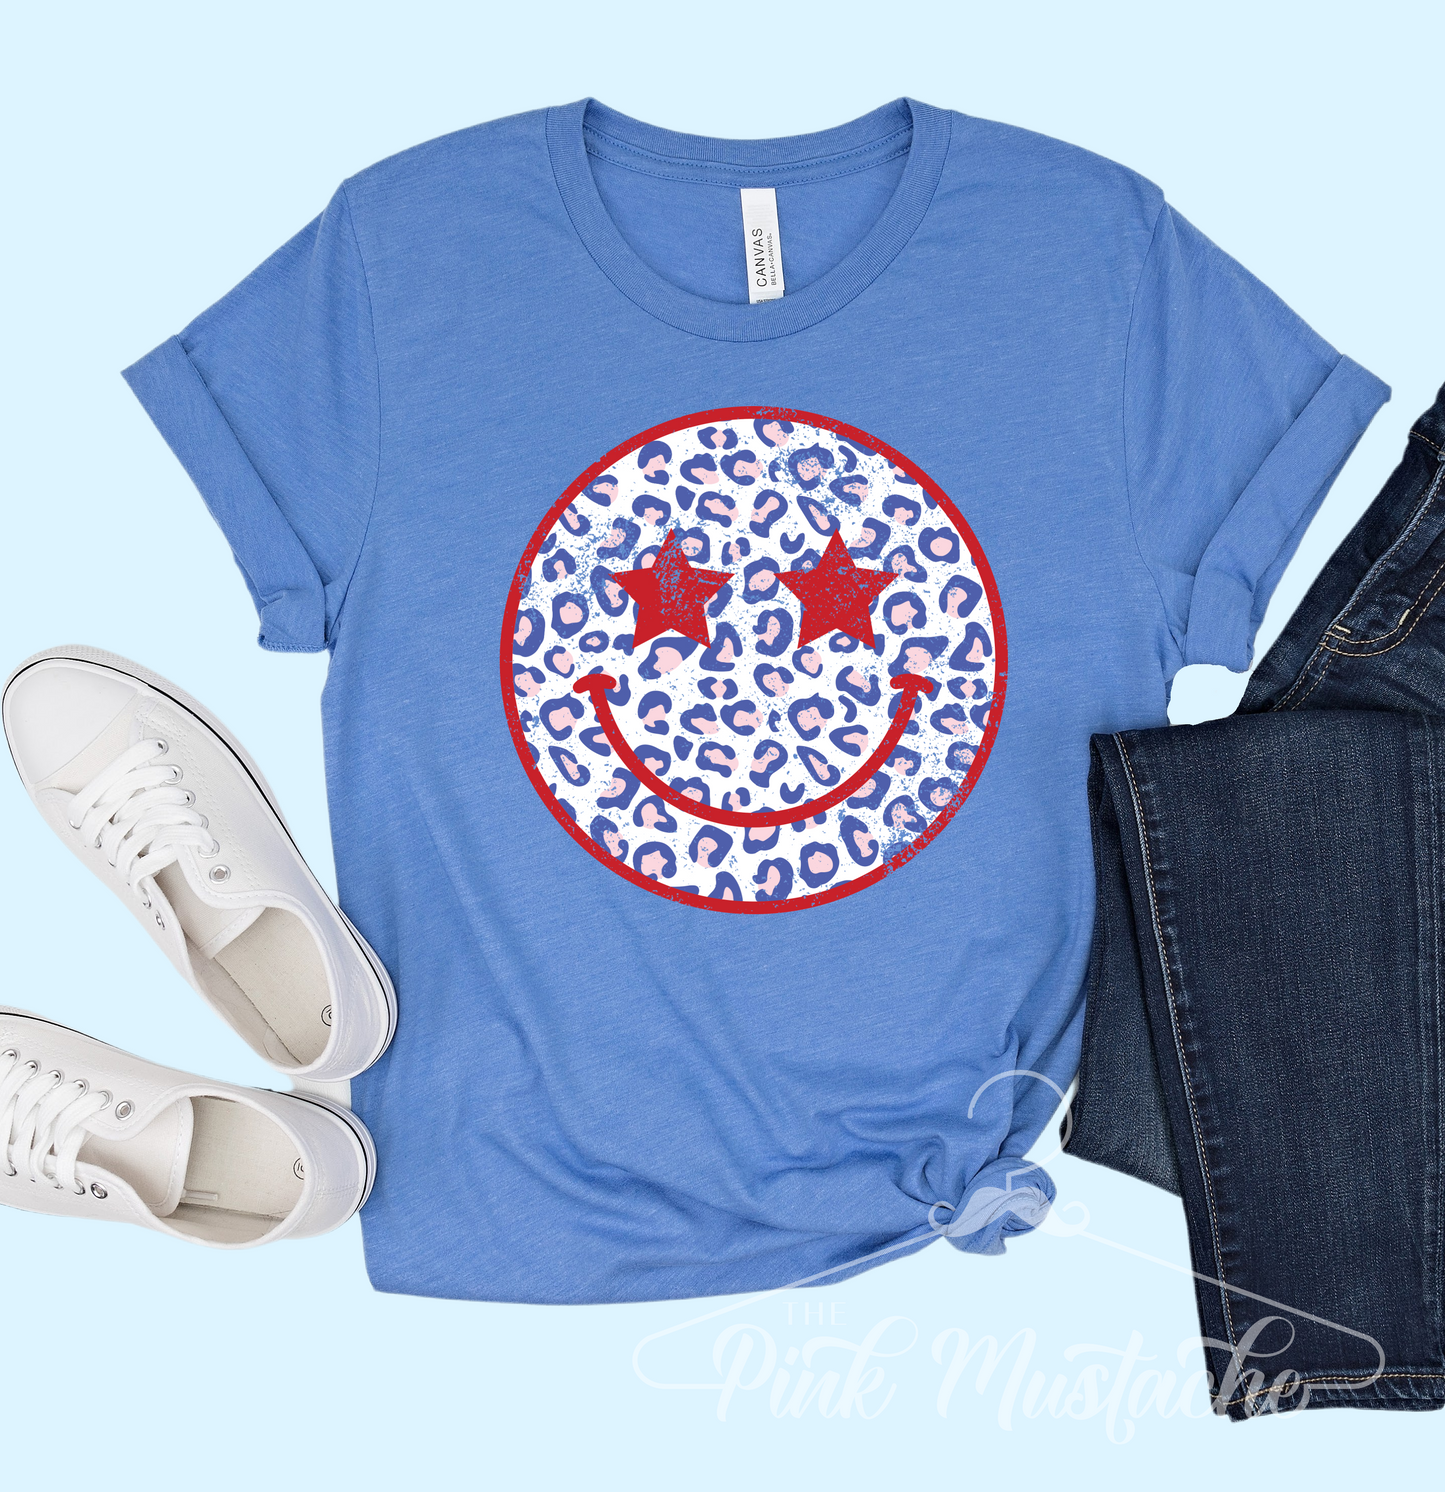 USA Leopard Smiley July 4th Toddler, Youth, and Adult Shirt / Memorial Day July 4th Tee/ Retro Style Shirt